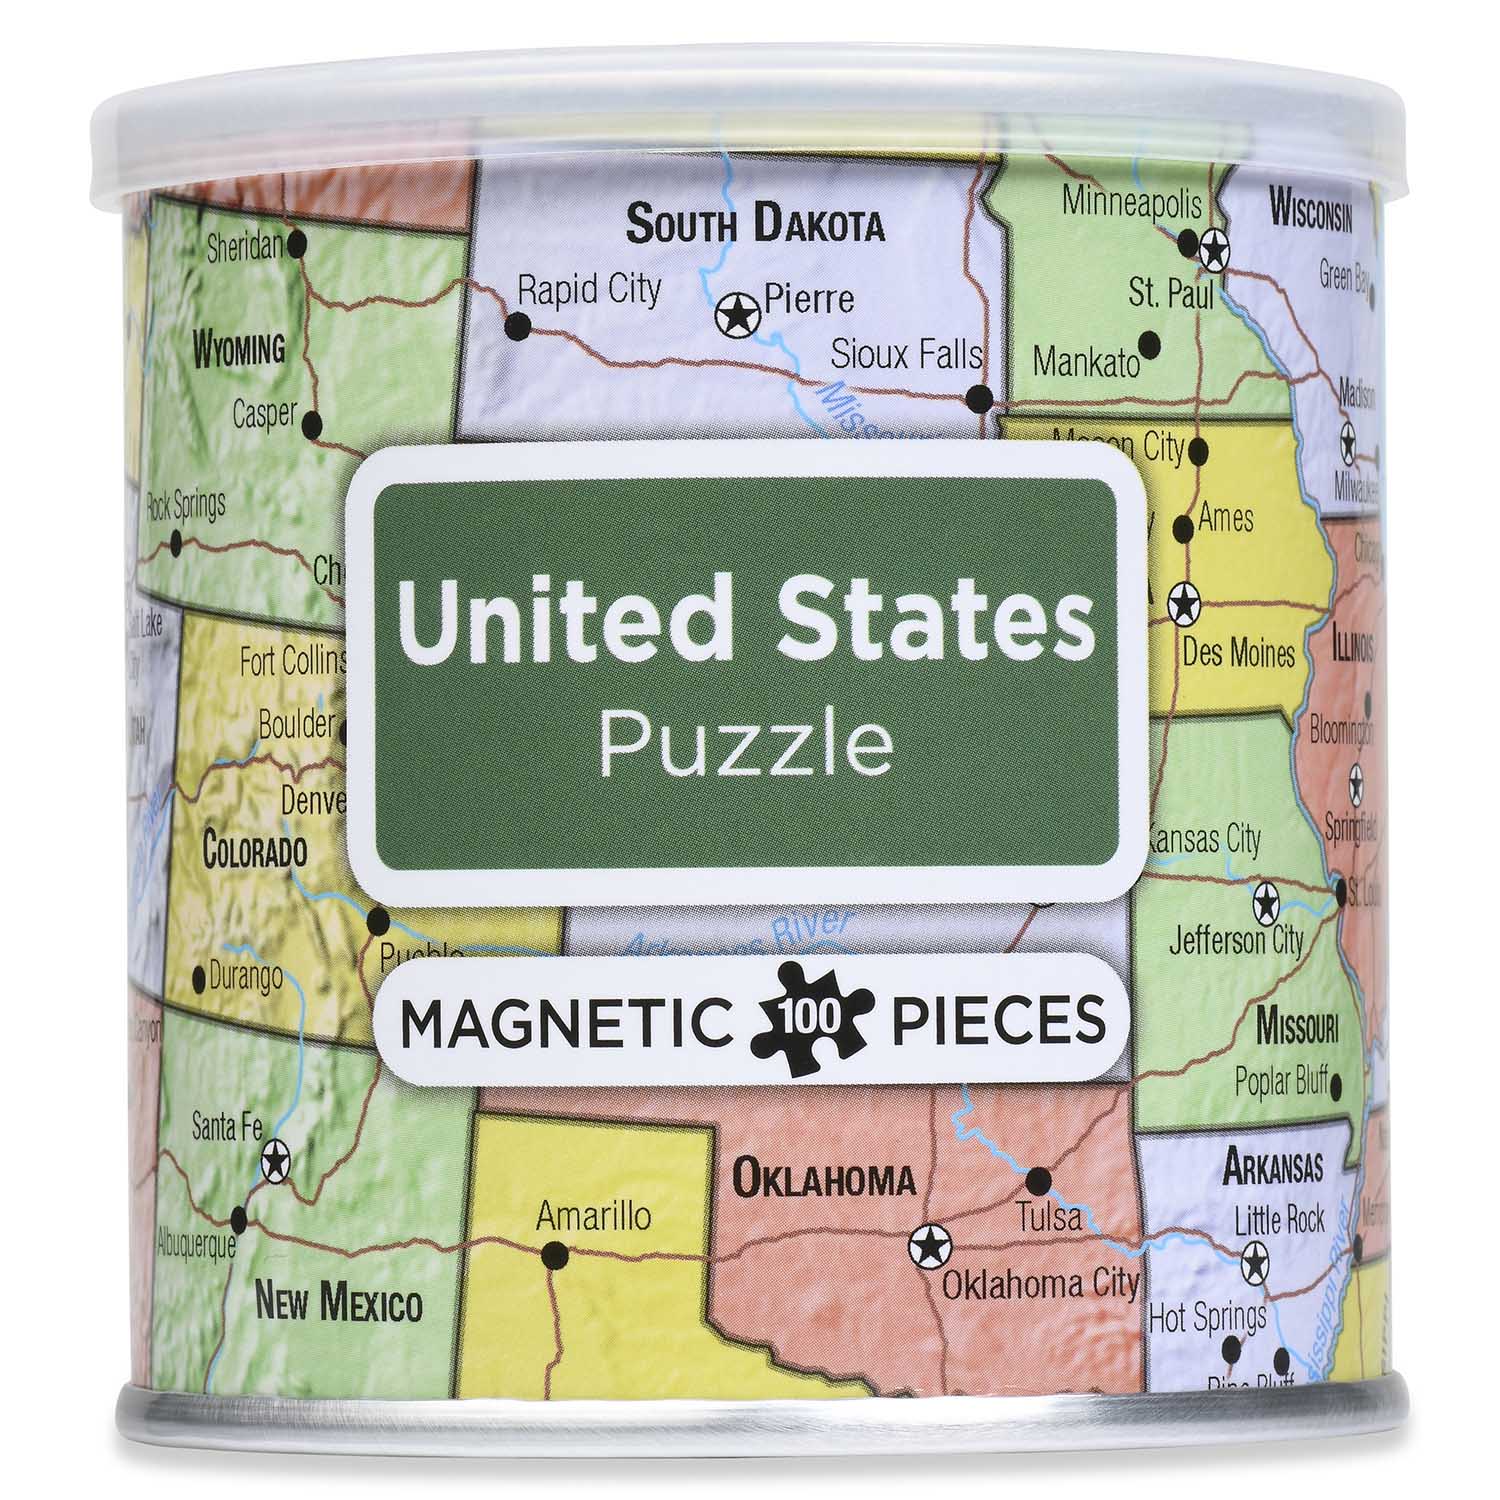 United States Puzzle Maps & Geography Jigsaw Puzzle